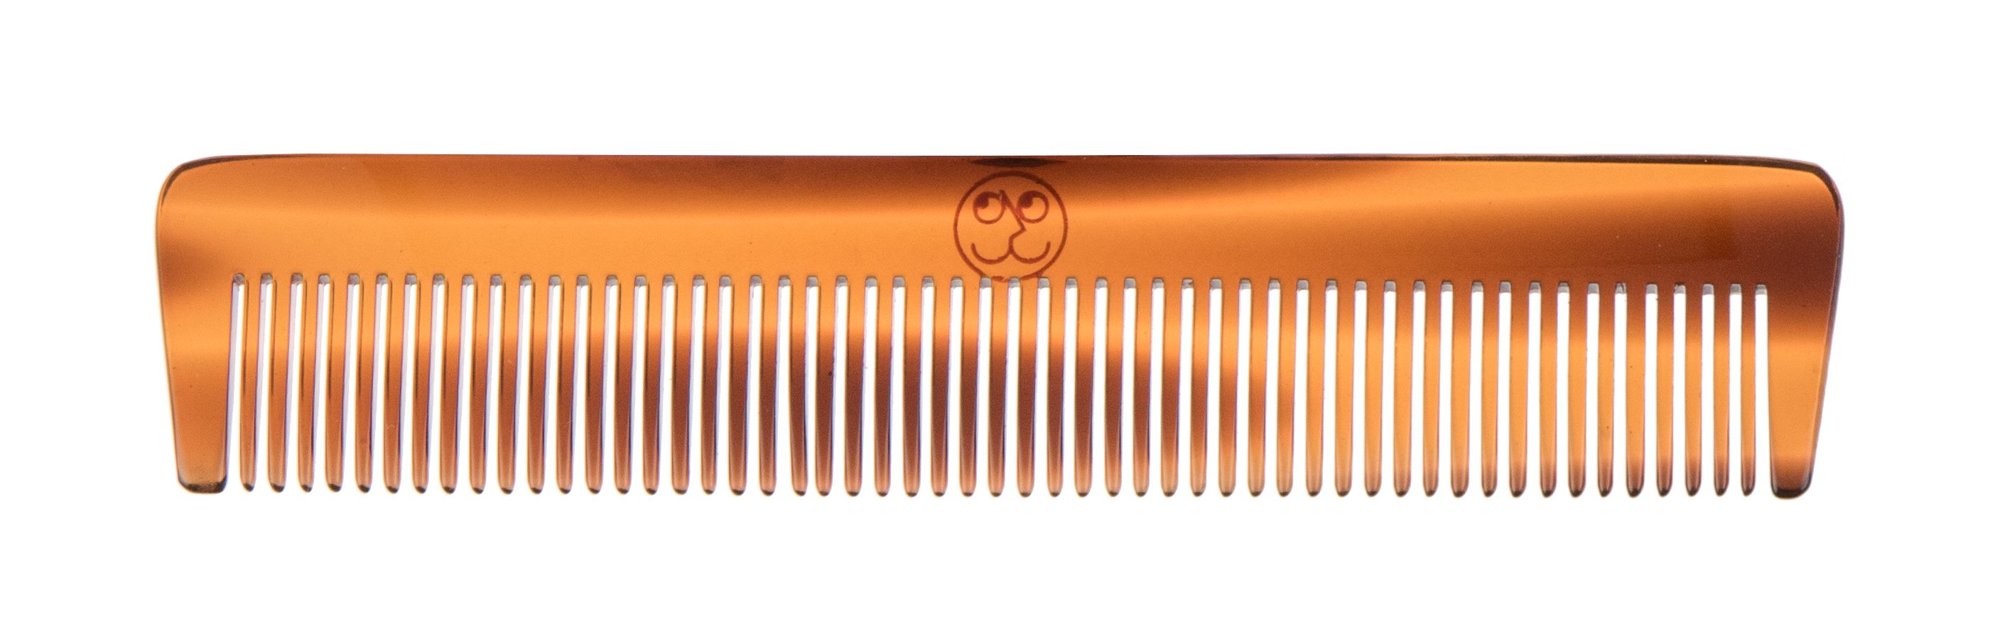 Farouk Systems Esquire Grooming Beard Comb barzdos šepetys